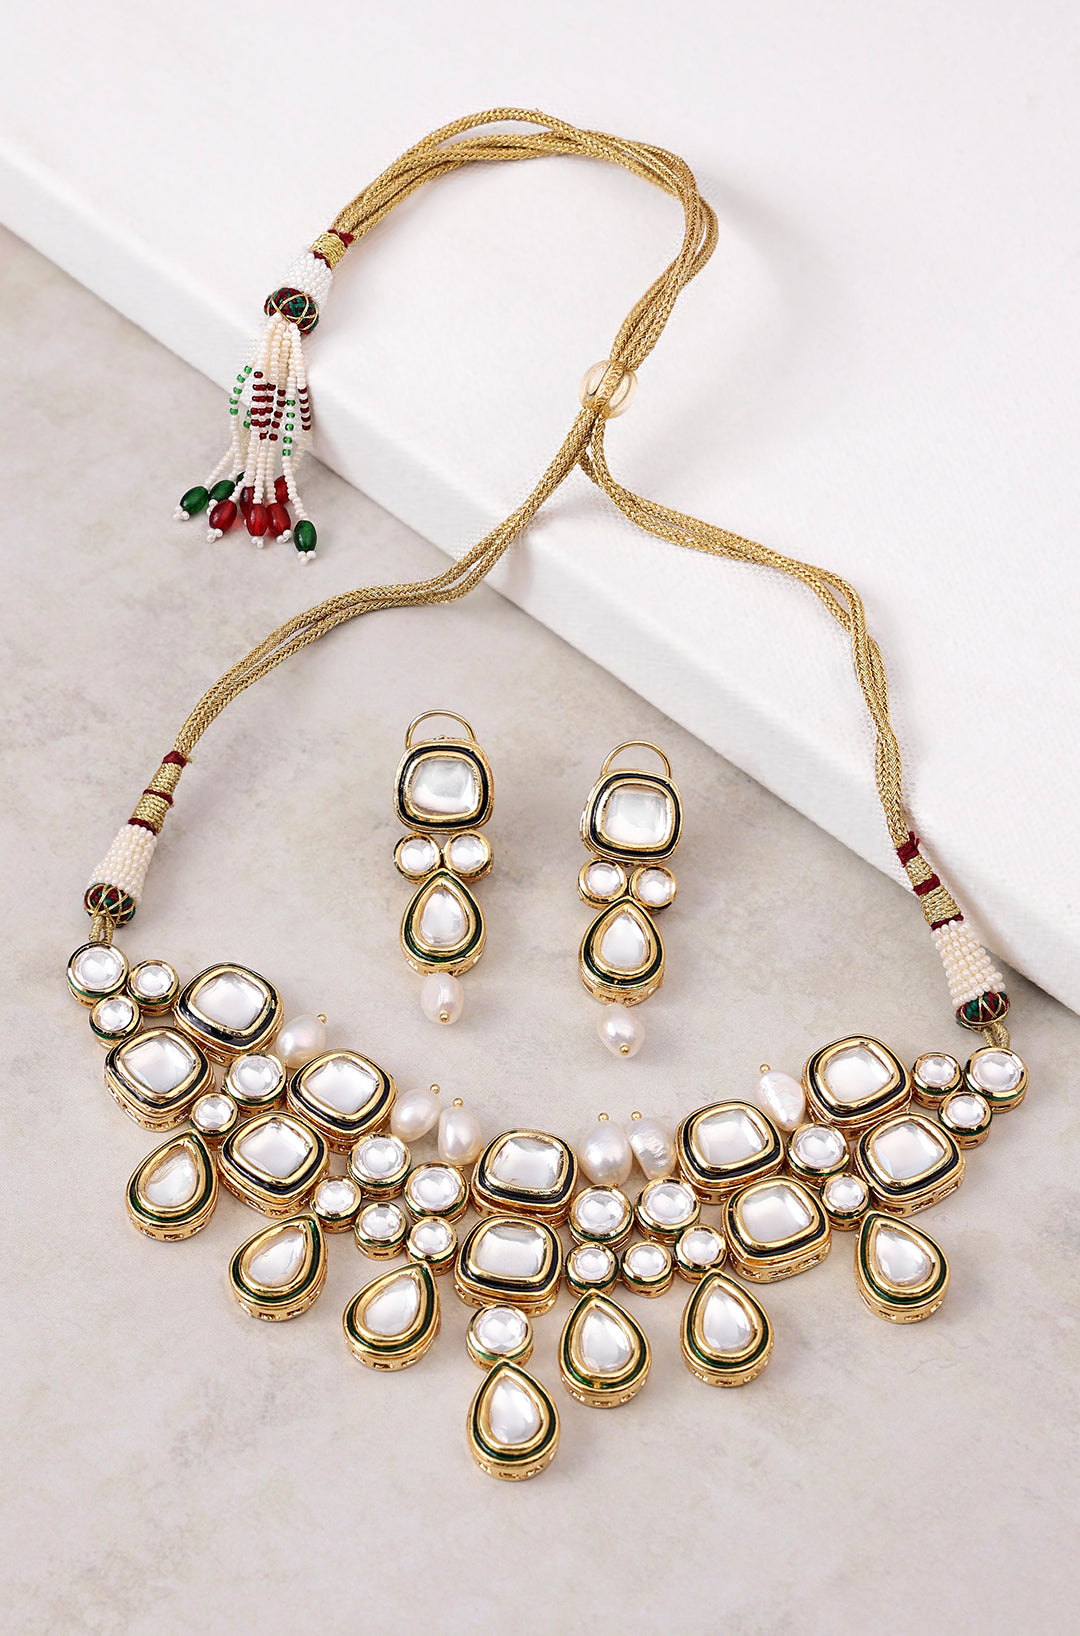 Classic Polki Chic Necklace Set - Joules by Radhika